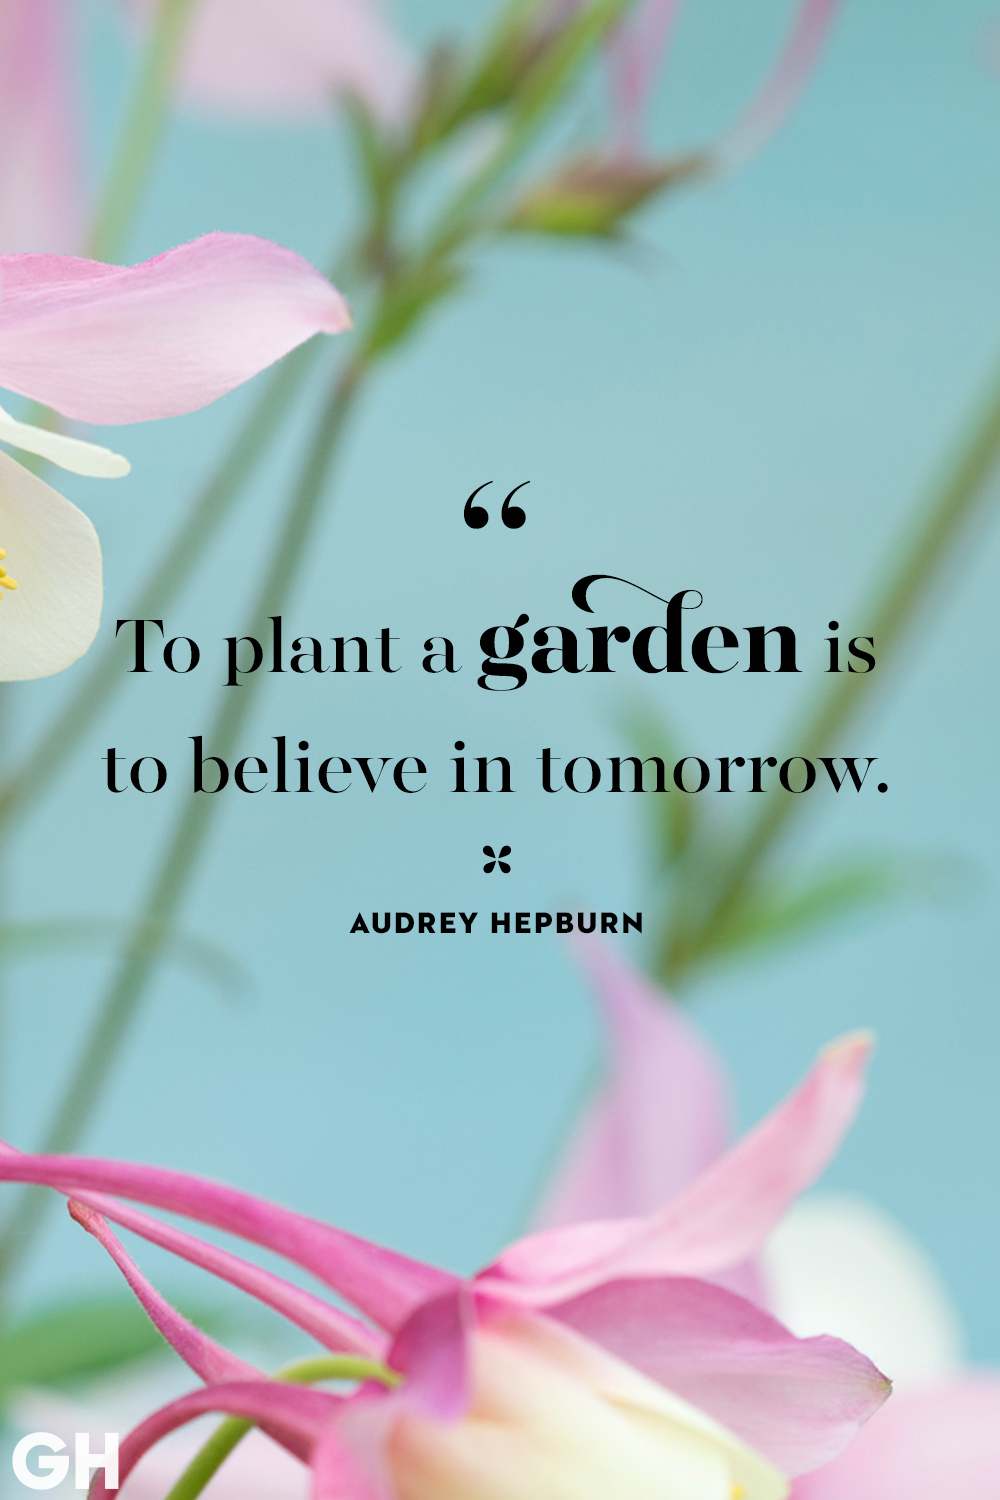 50 Inspirational Spring Quotes - Quotes for Welcoming Spring